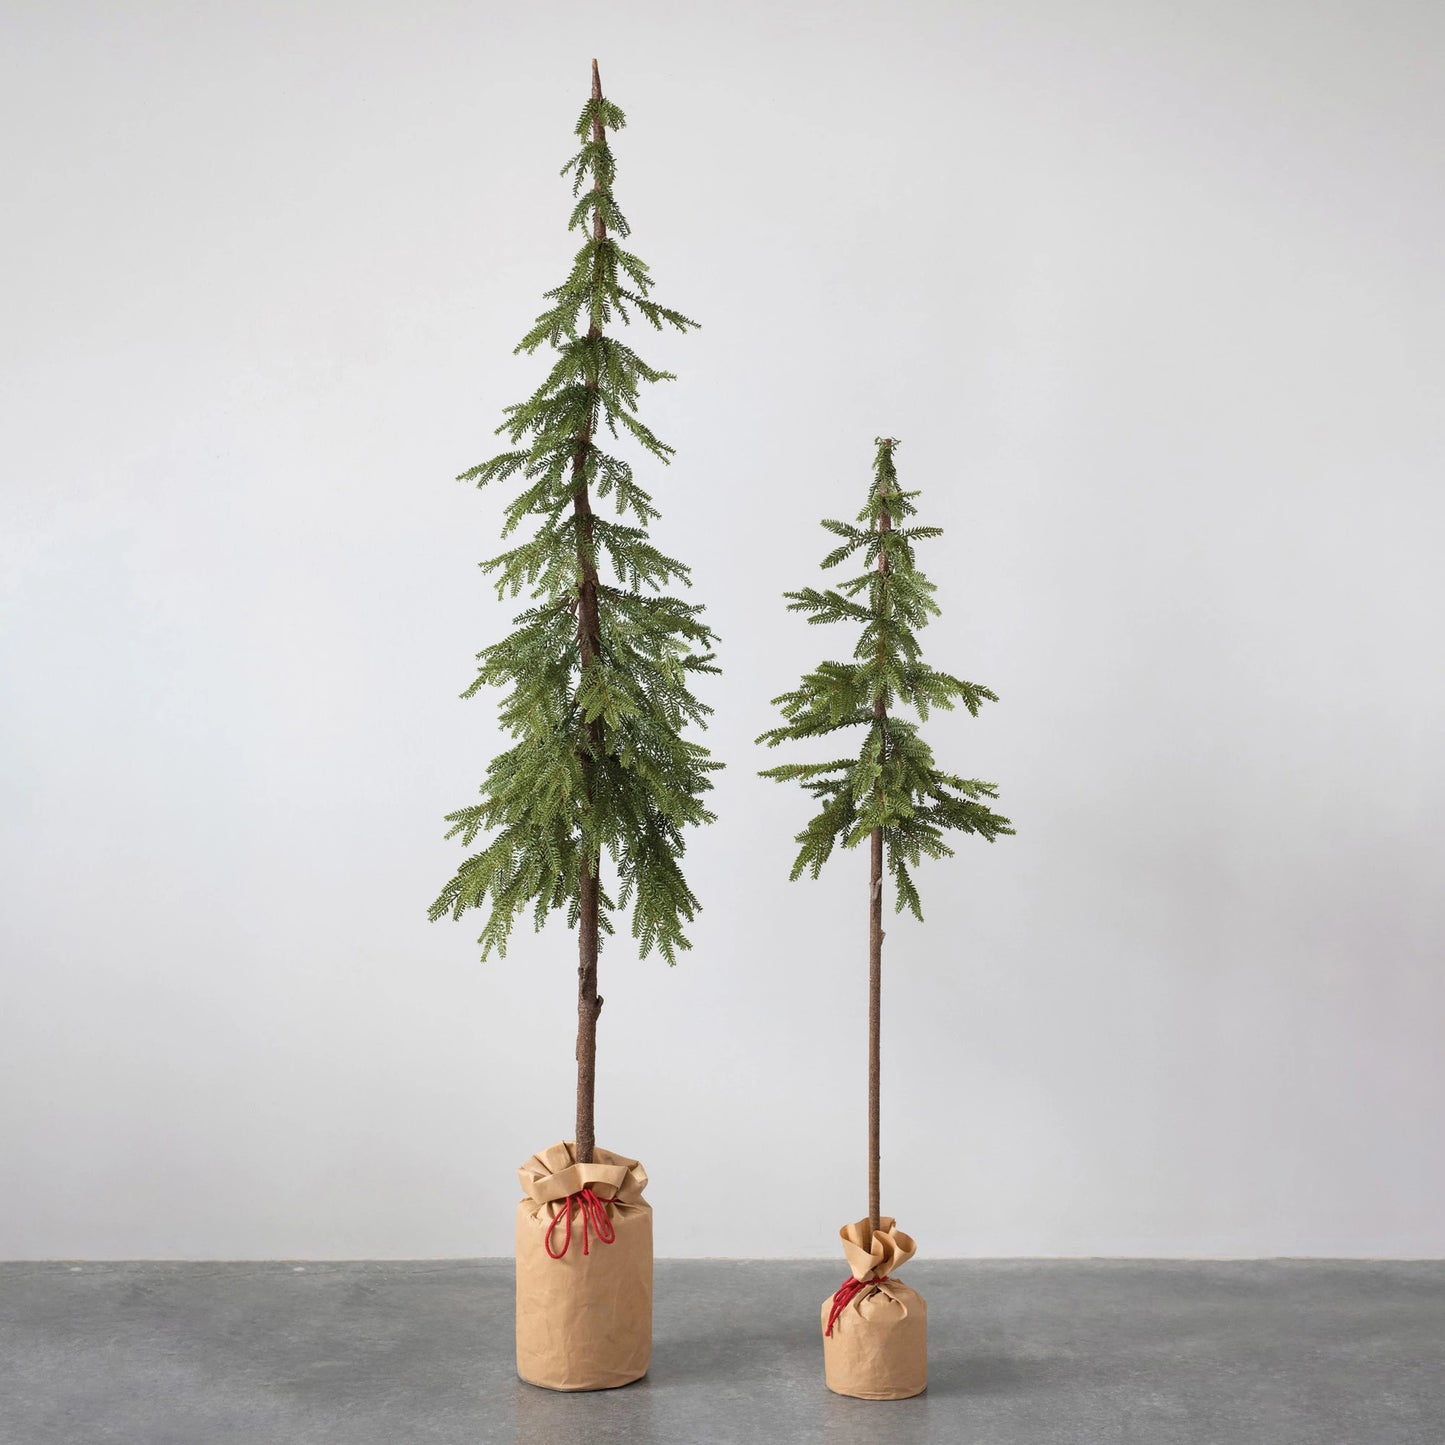 Faux Pole Pine Tree in Paper Sack - 2 Sizes